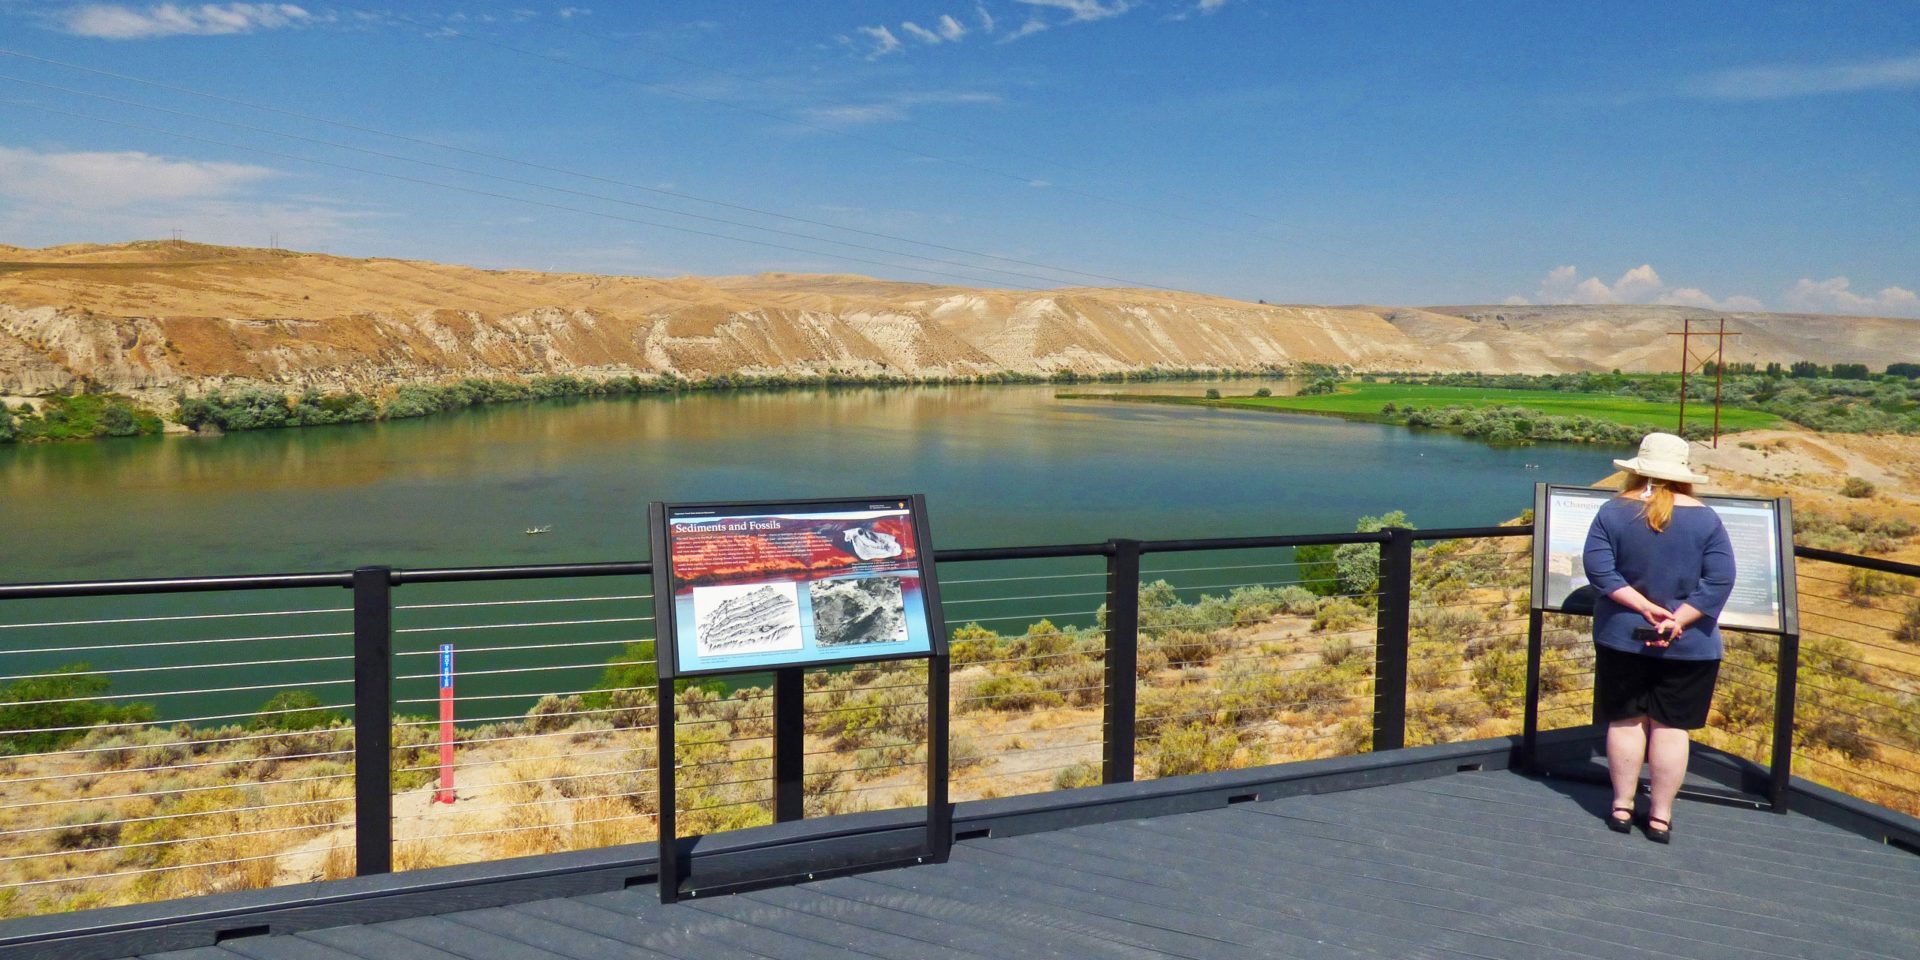 Z-HAGERMAN FOSSIL BEDS NATIONAL MONUMENT-2X1